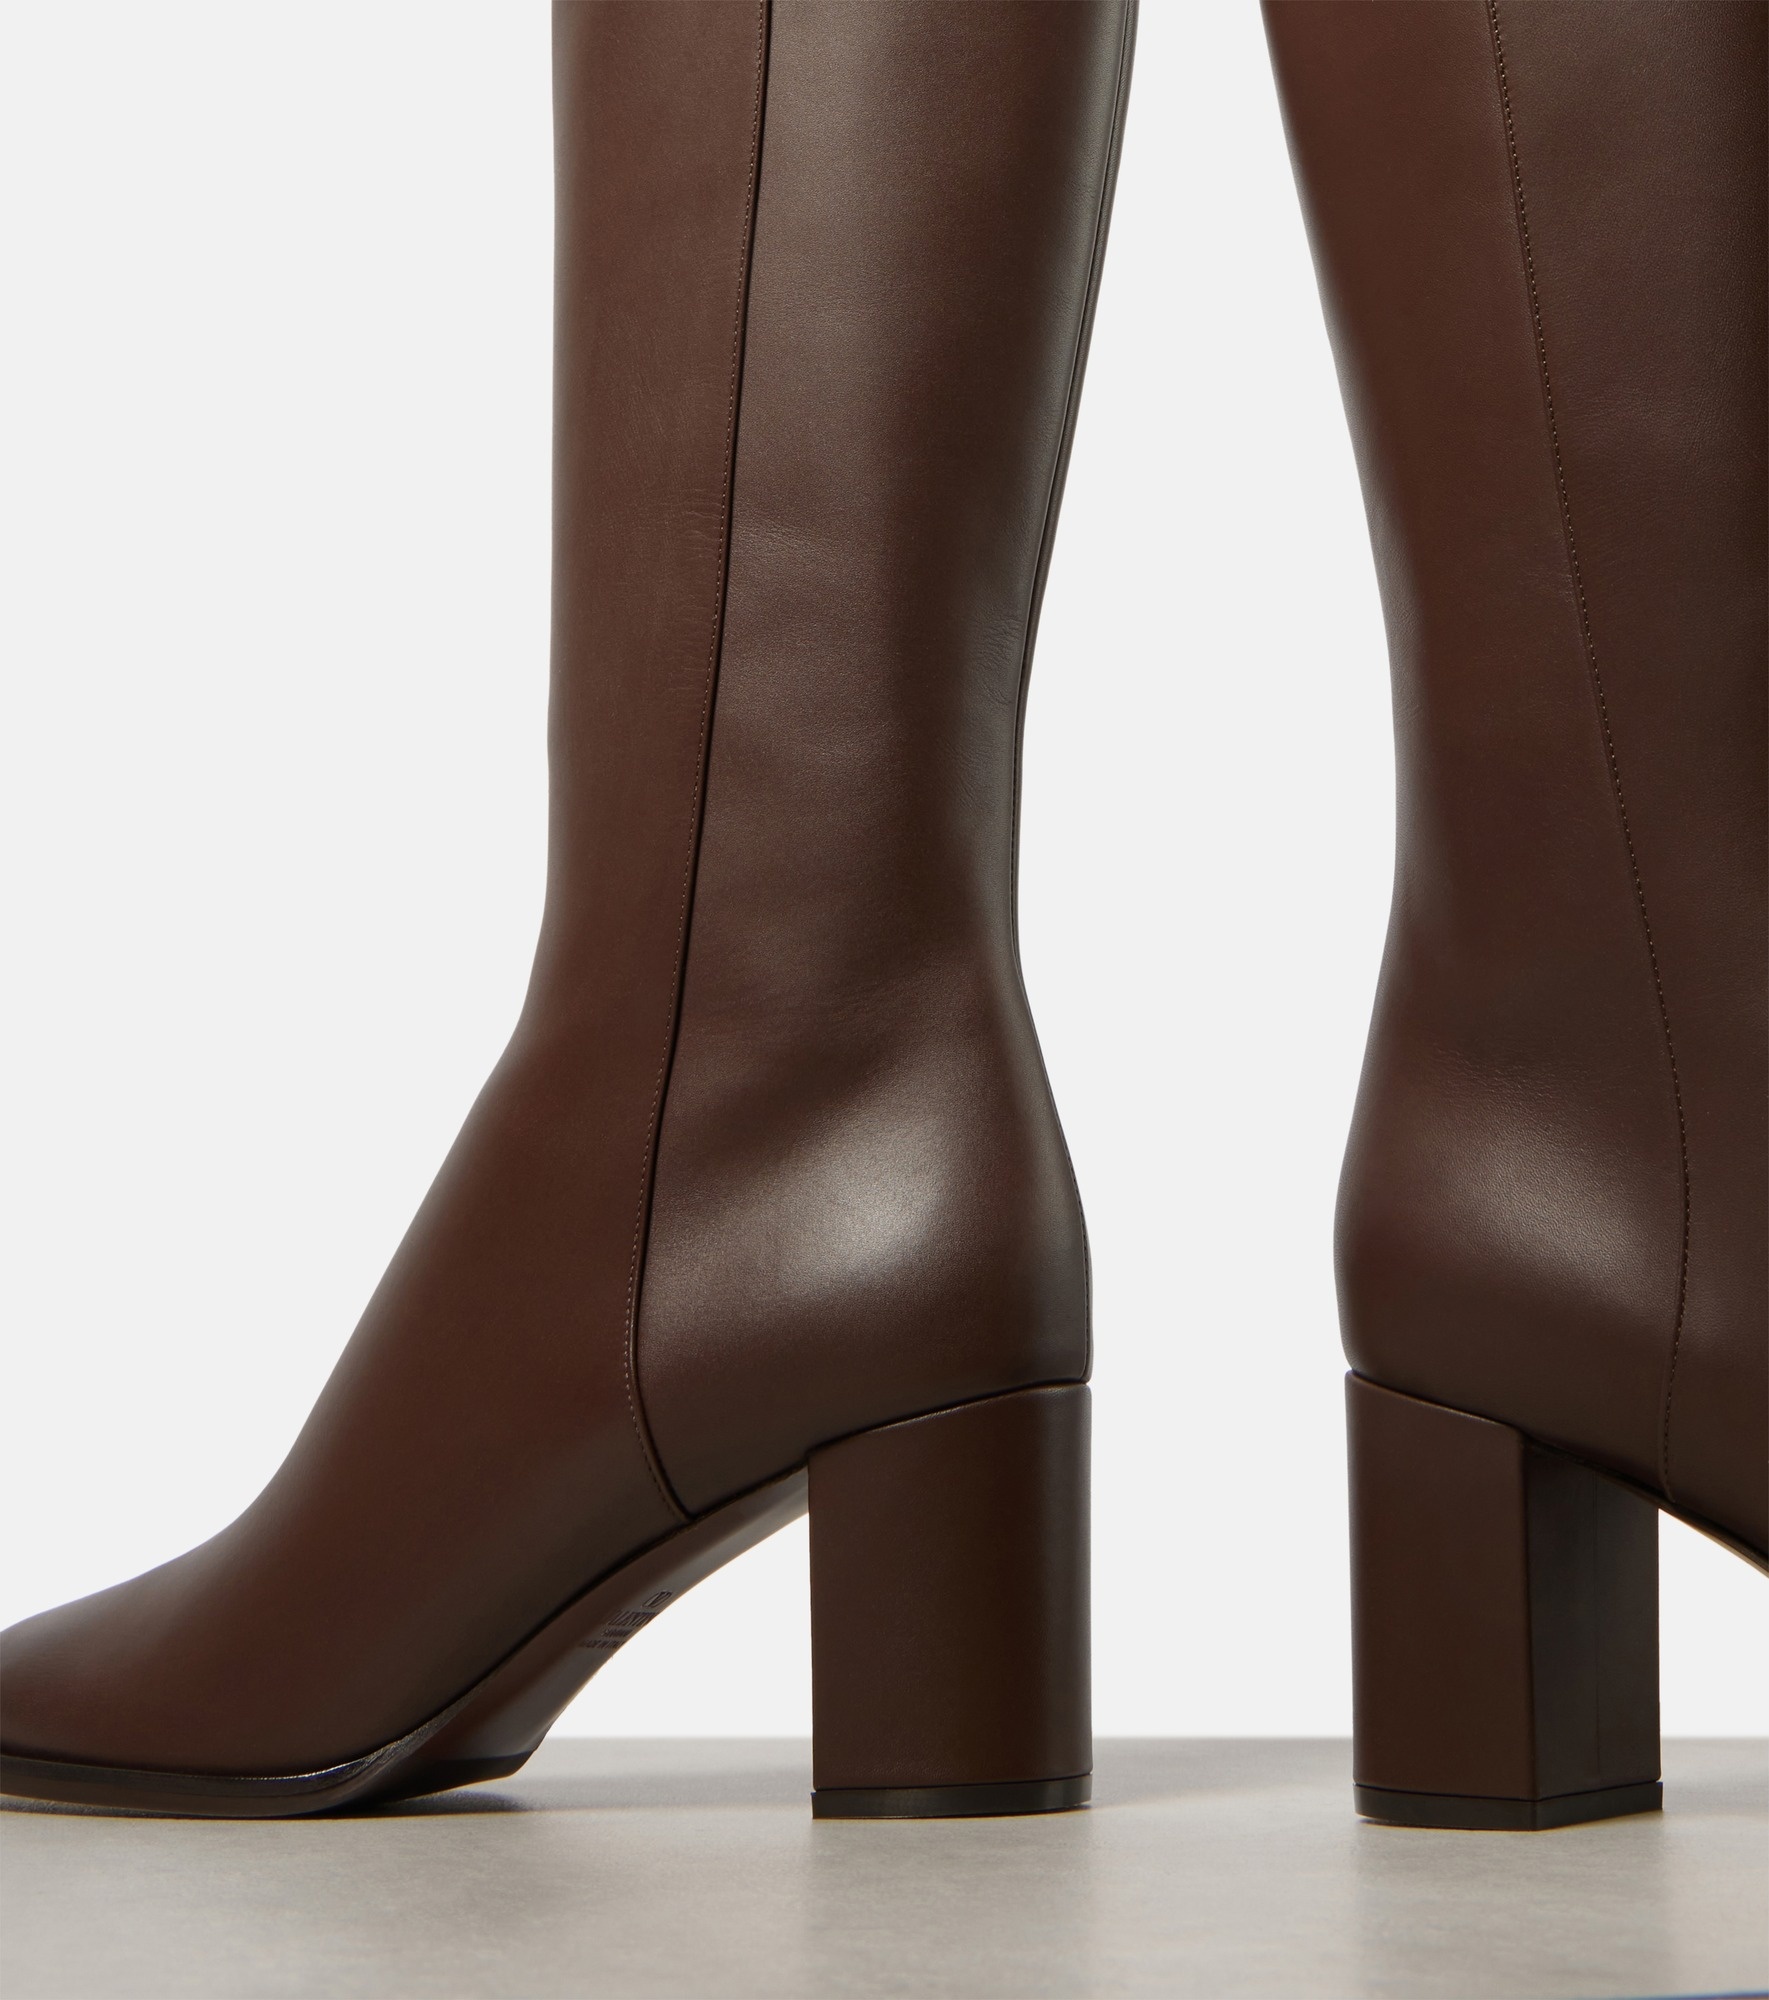 VLogo Signature leather knee-high boots - 6